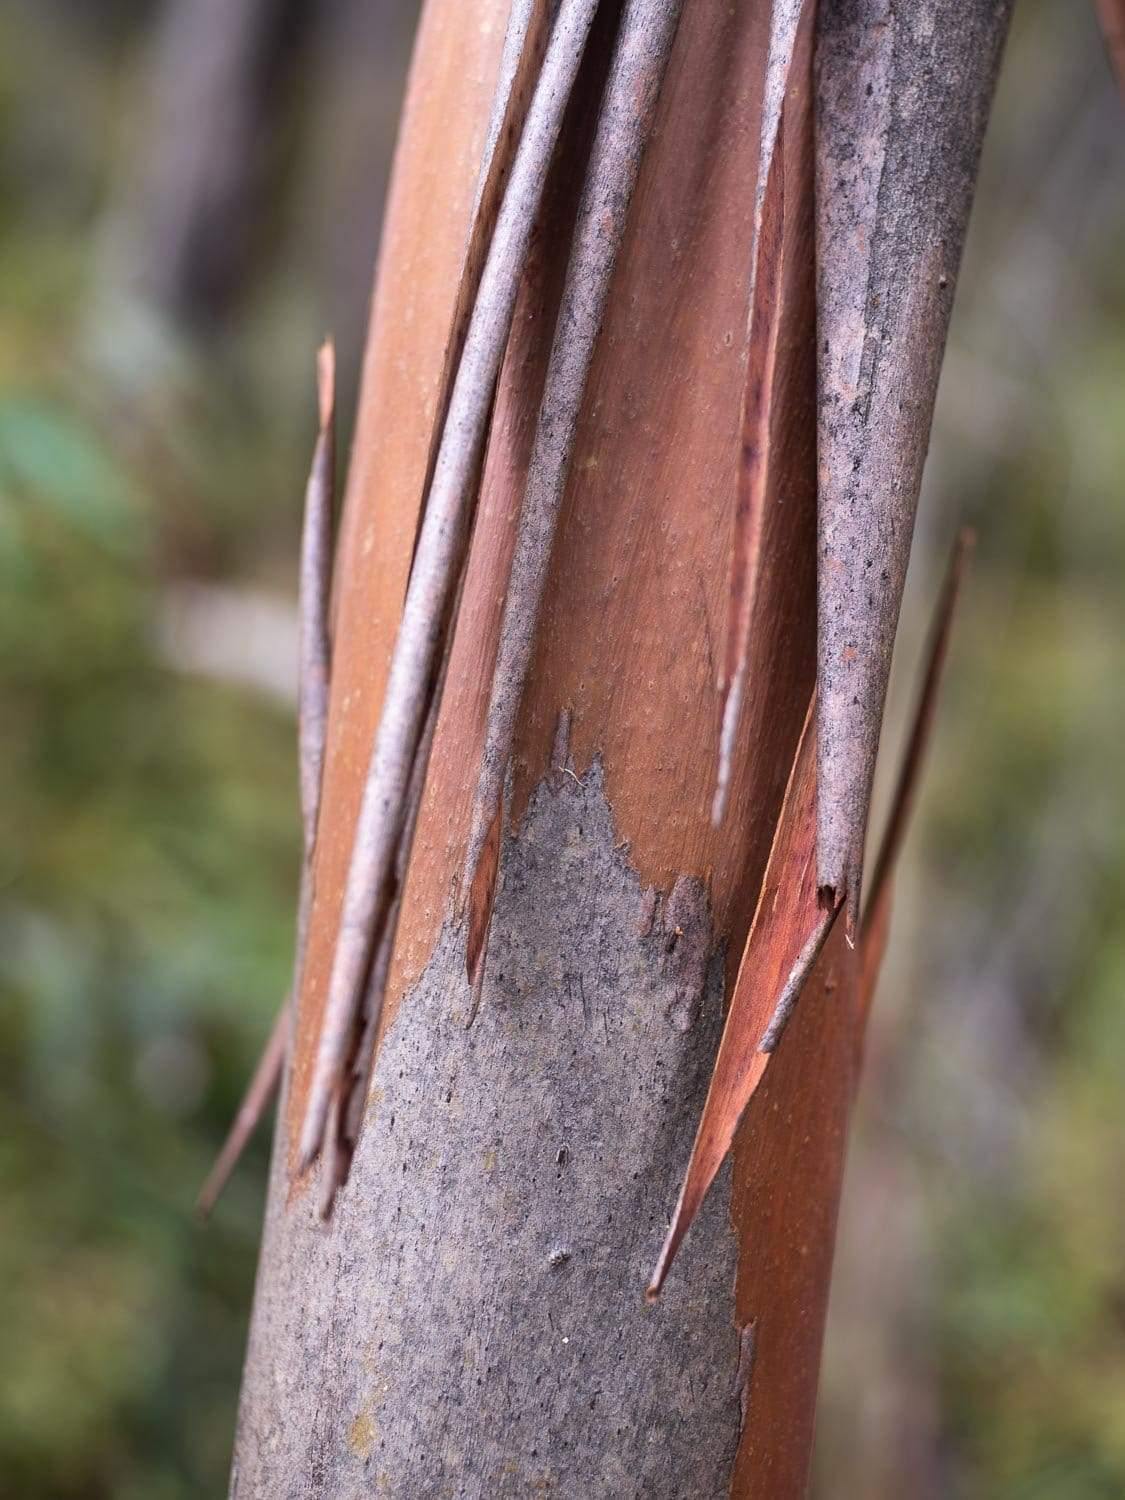 A close-up shot of a thin tree stem naturally peeled from some areas and rolled up, Bushland #2 - Kangaroo Island SA